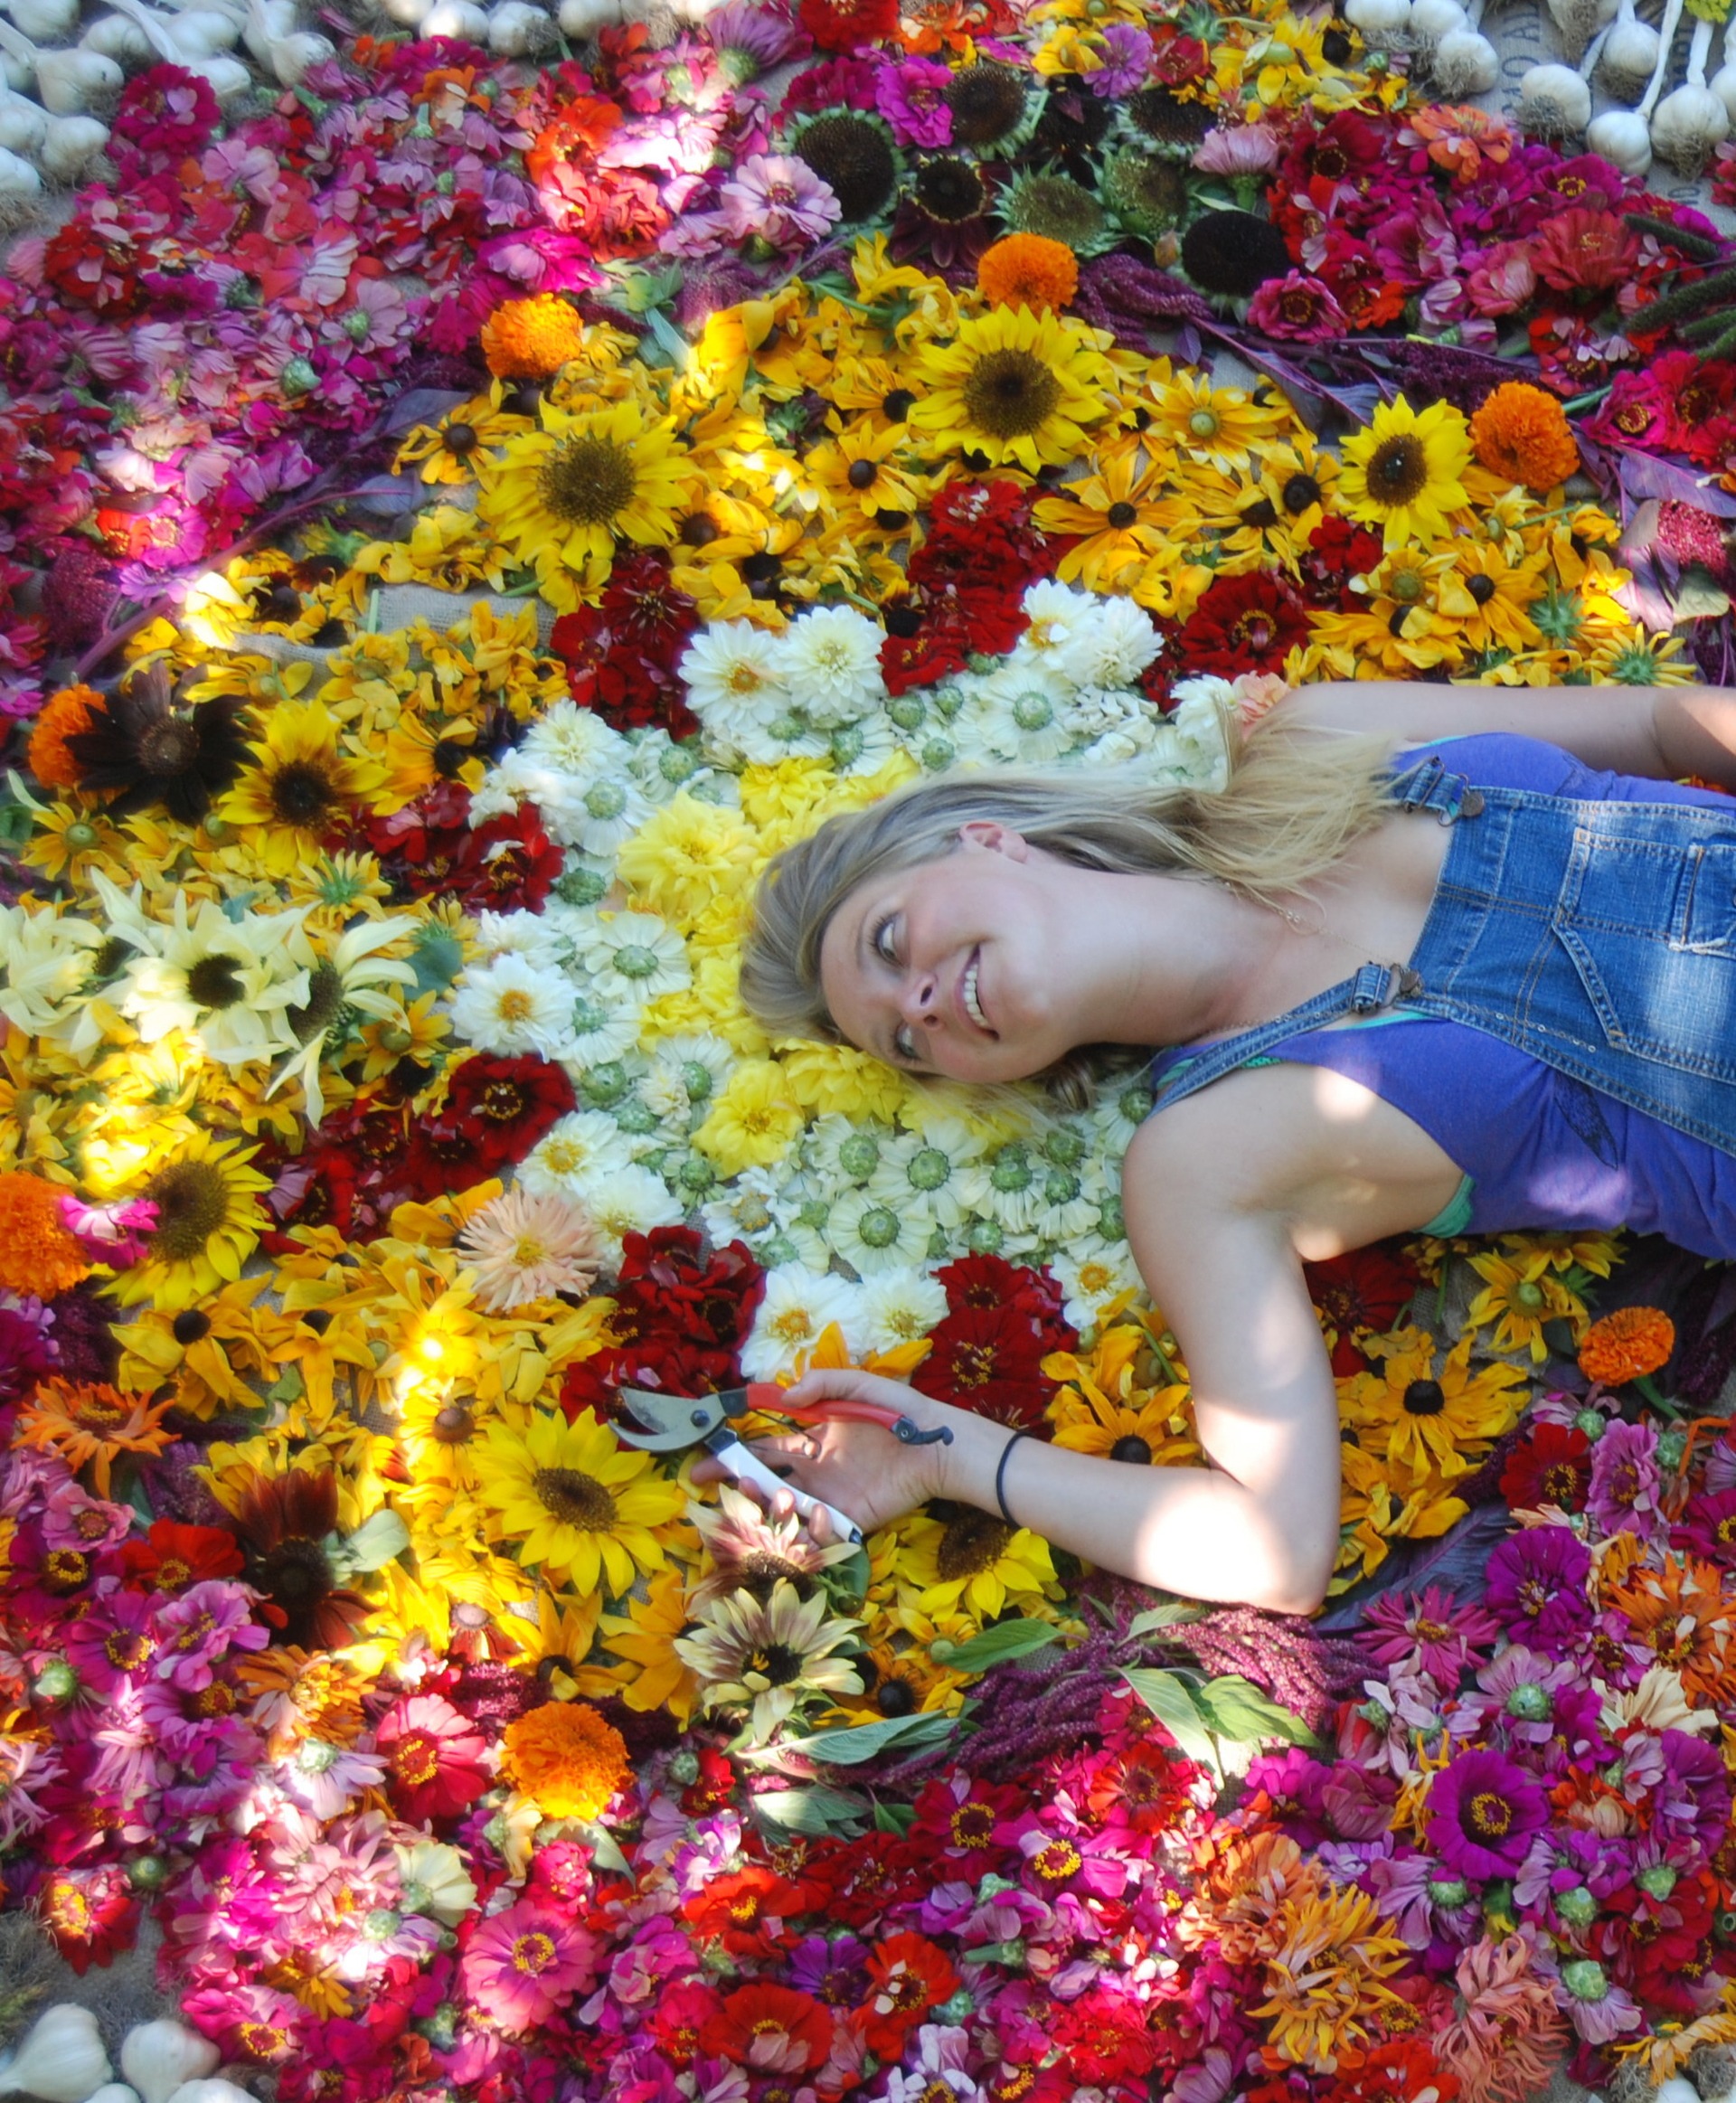 Lady laying in flowers